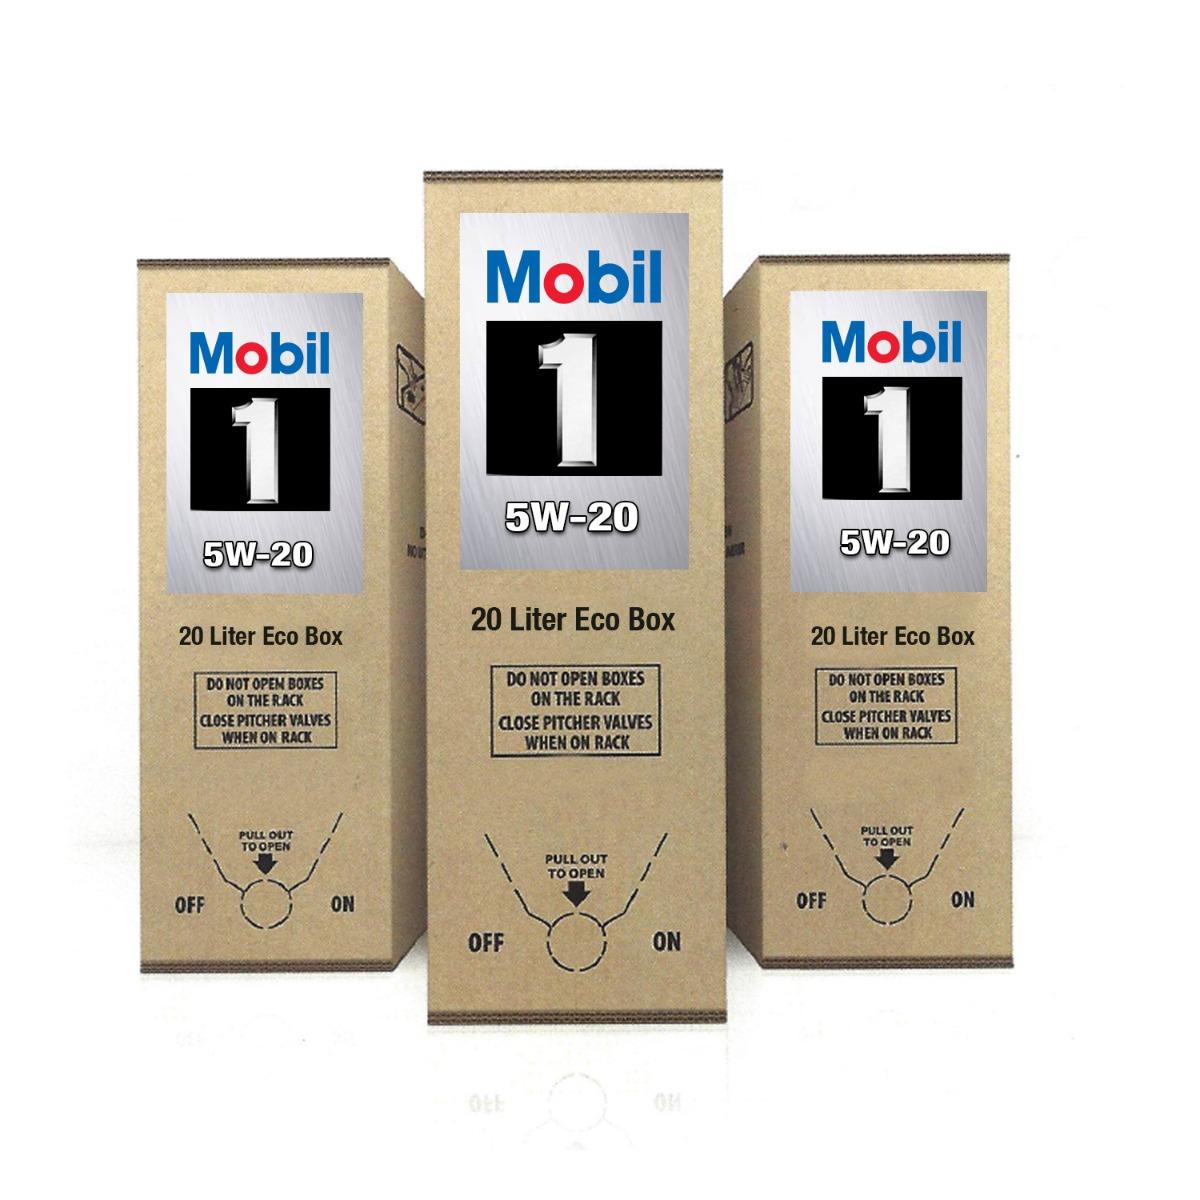 XMO 124124 Mobil 1 Advanced Full Synthetic 5w-20 (6 Gal Box)